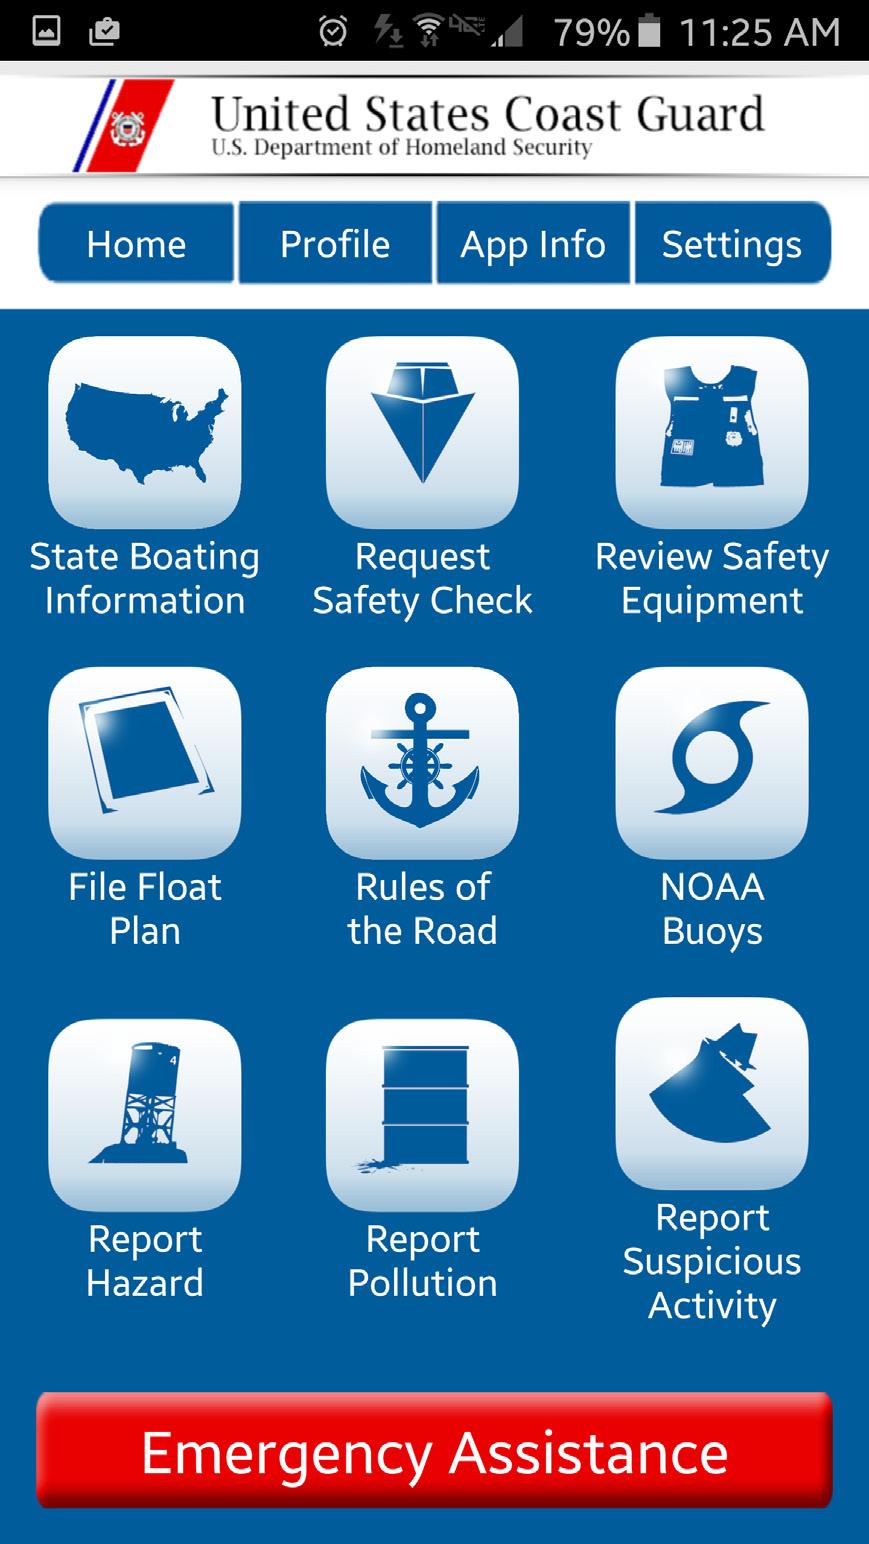 Apple or Android file float plans, request a safety check or report a hazard Marks